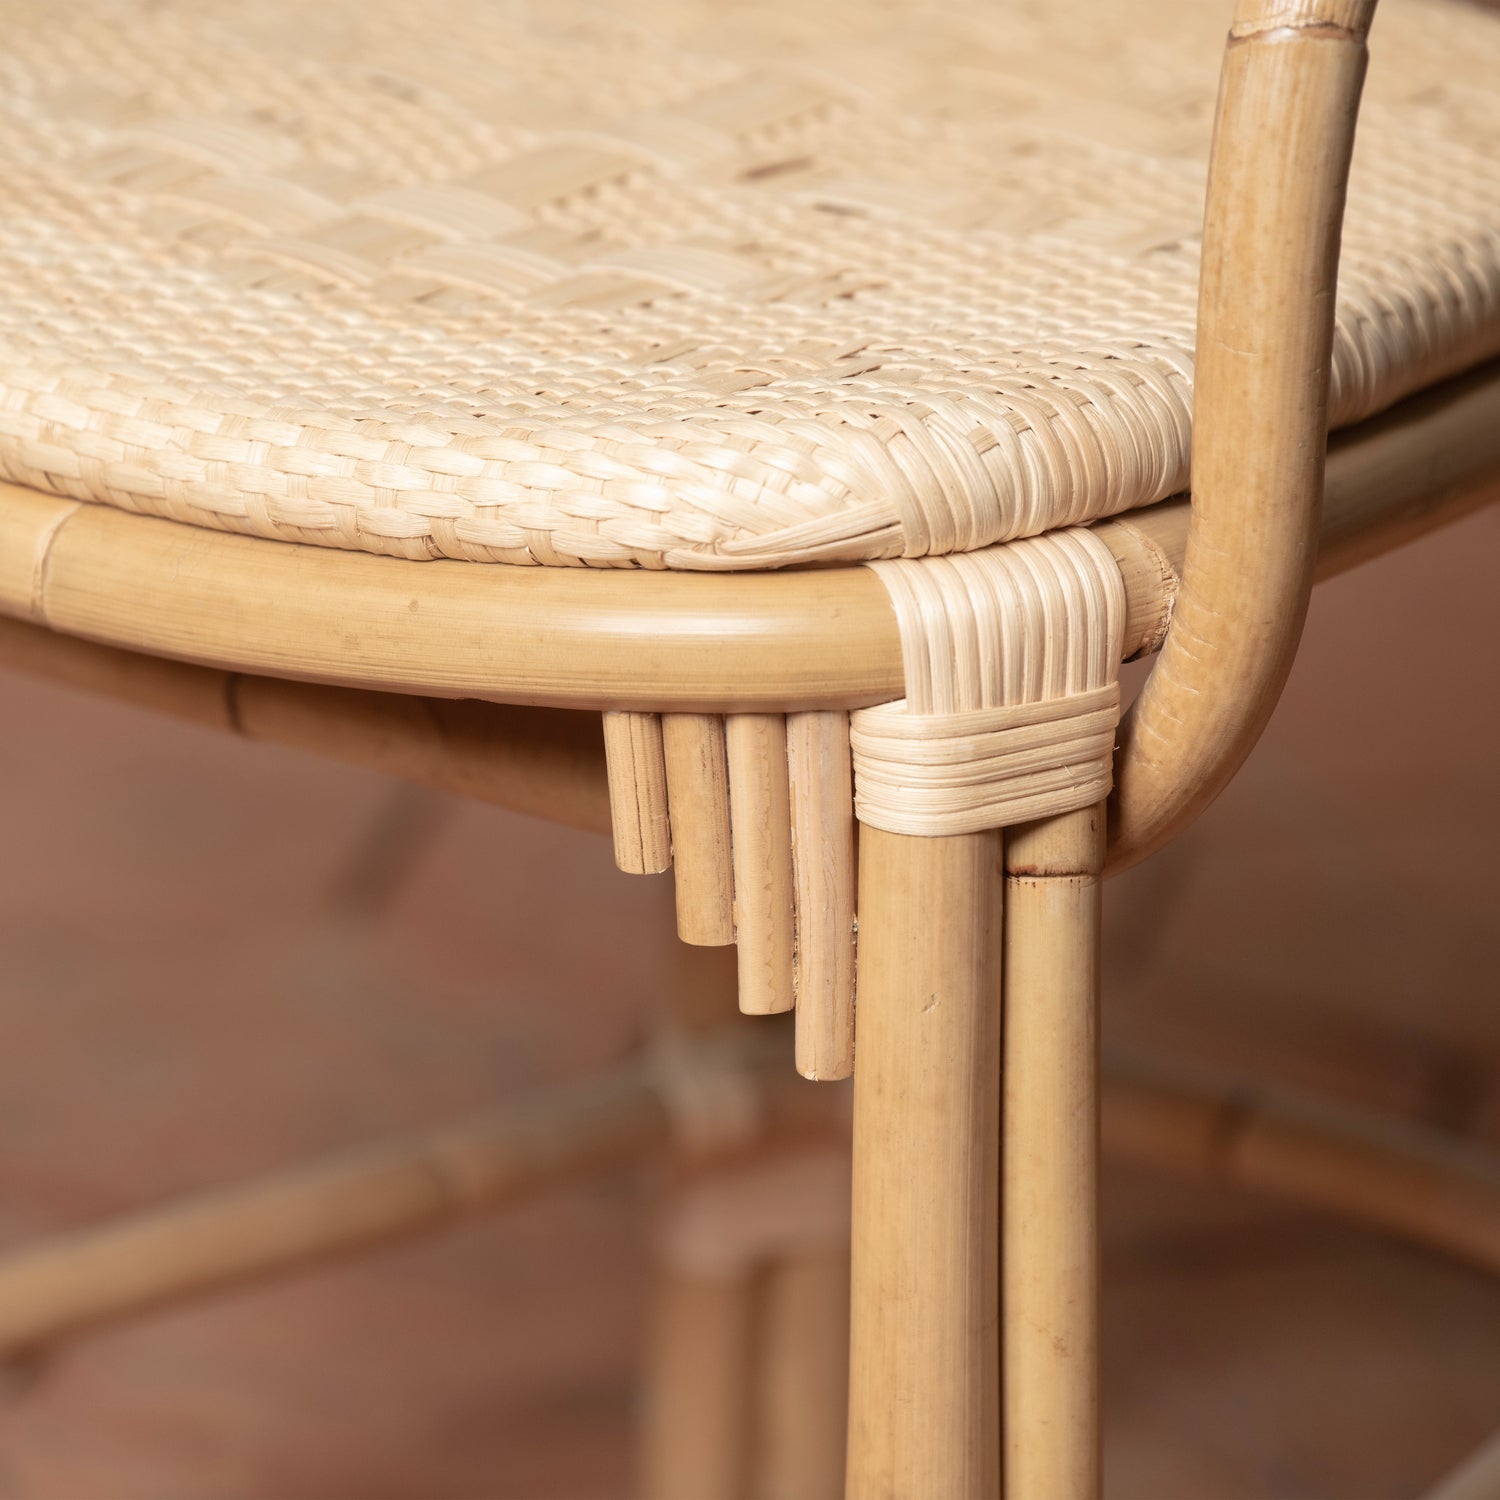 A closeup of the rattan chair and its woven cane detailing. 